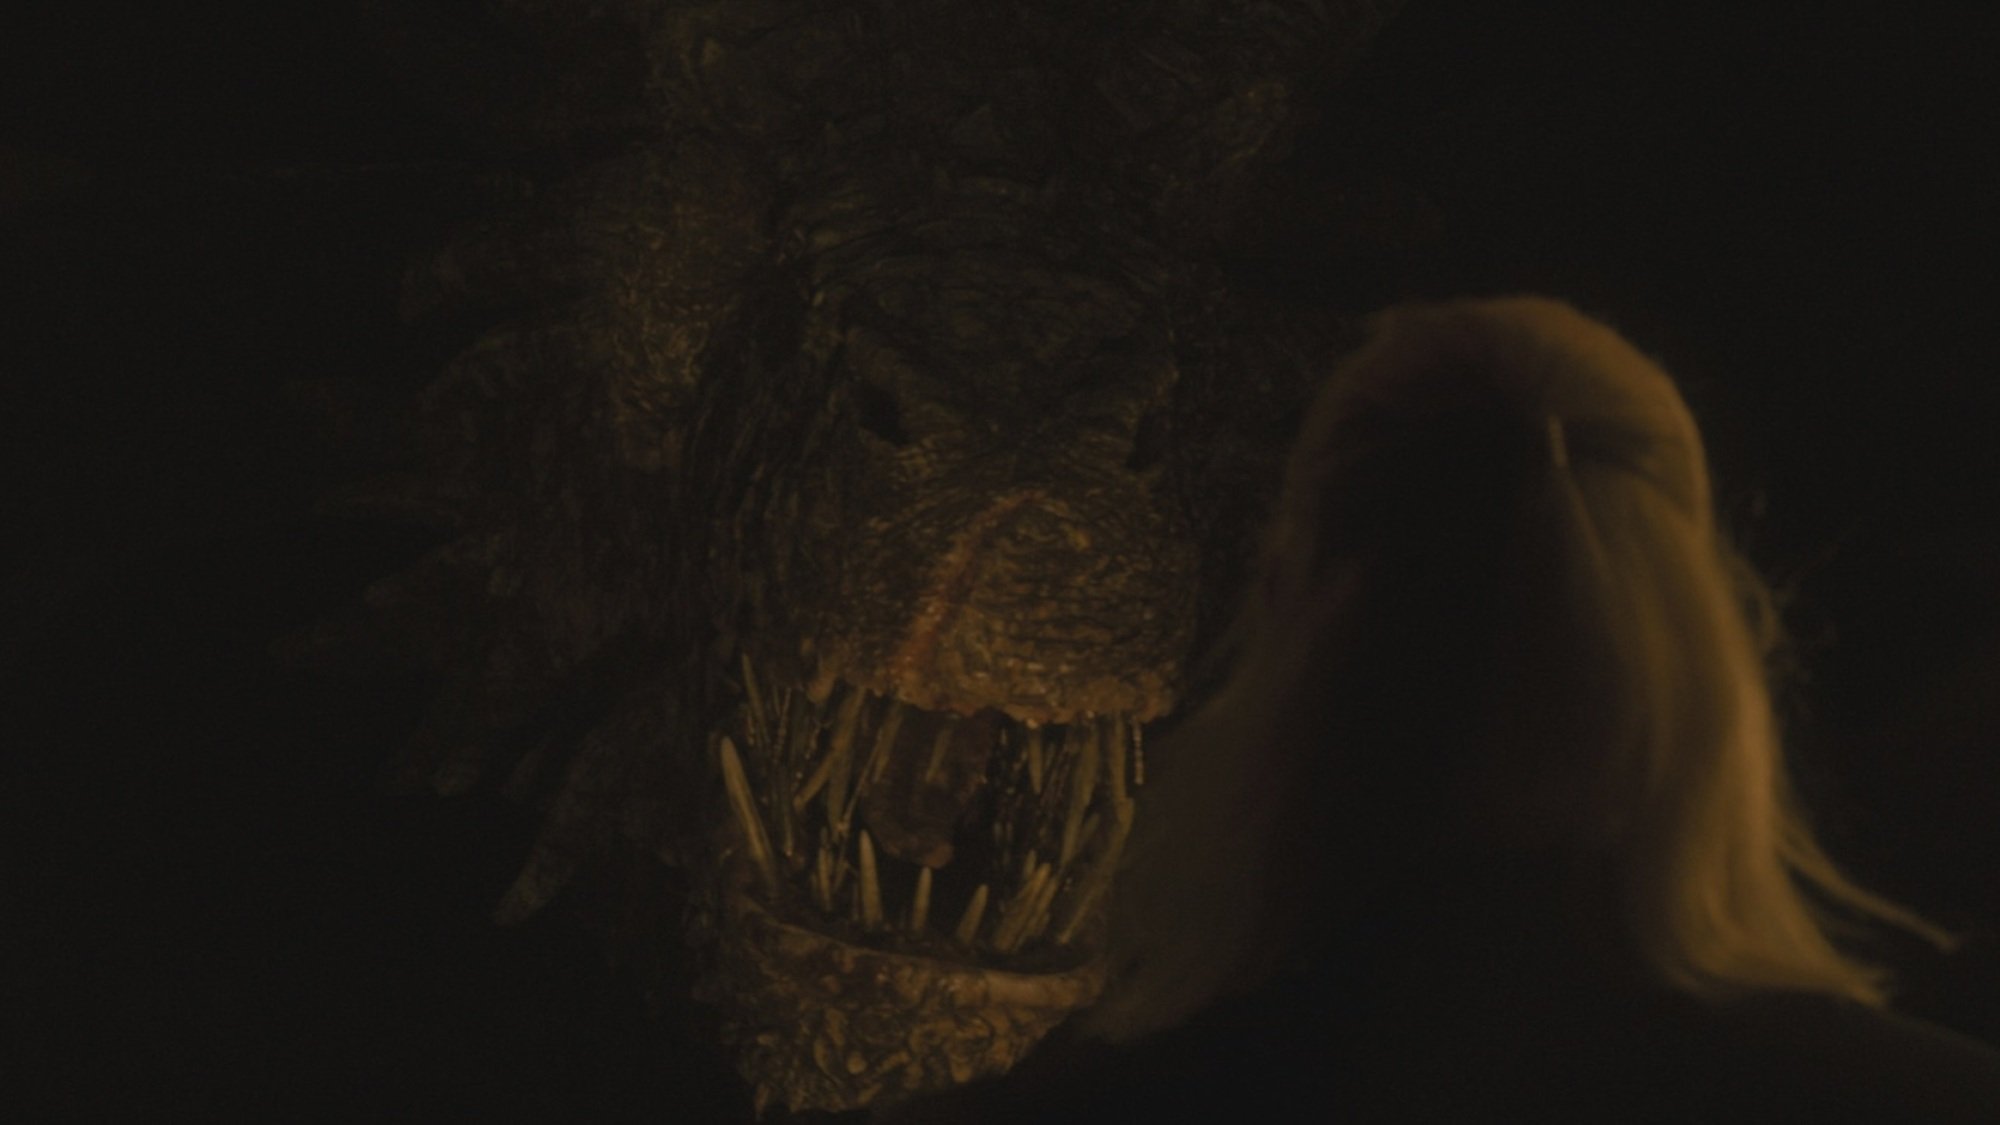 A large bronze dragon stares down at a man with silver blonde hair.